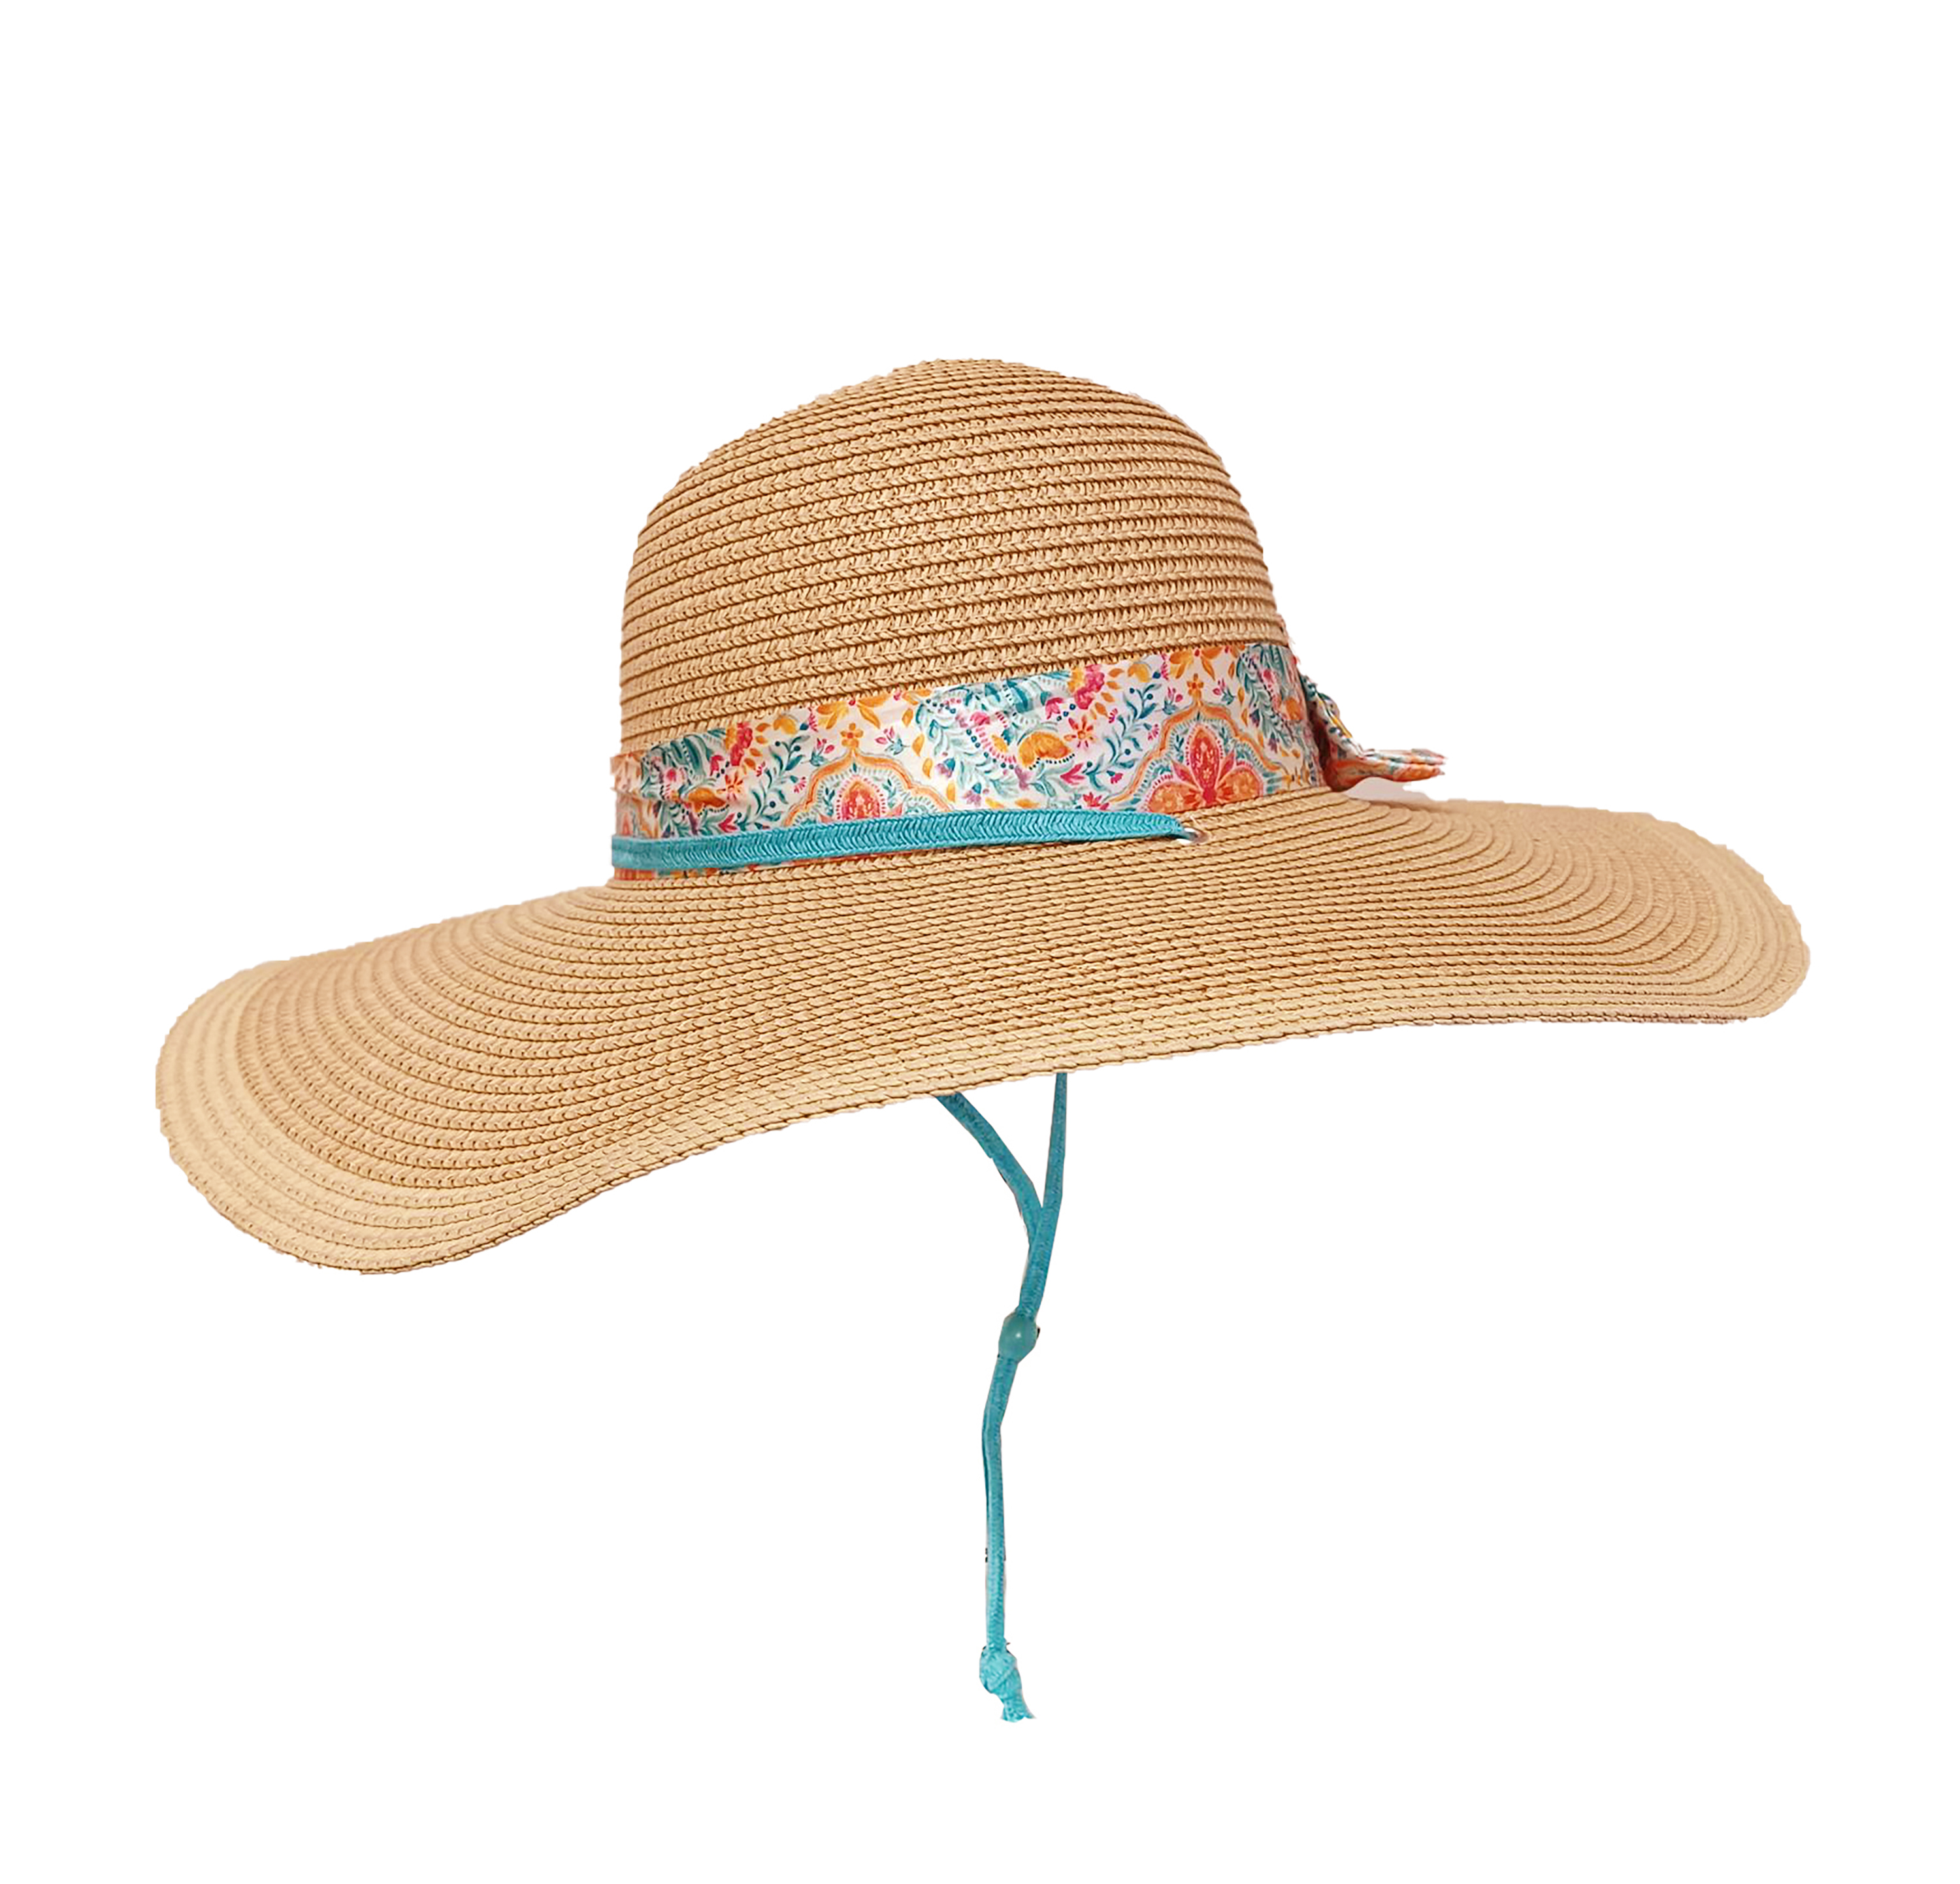 The Pioneer Woman Multicolor Folk Geo Gardening Hat, One Size Fits Most - image 5 of 9